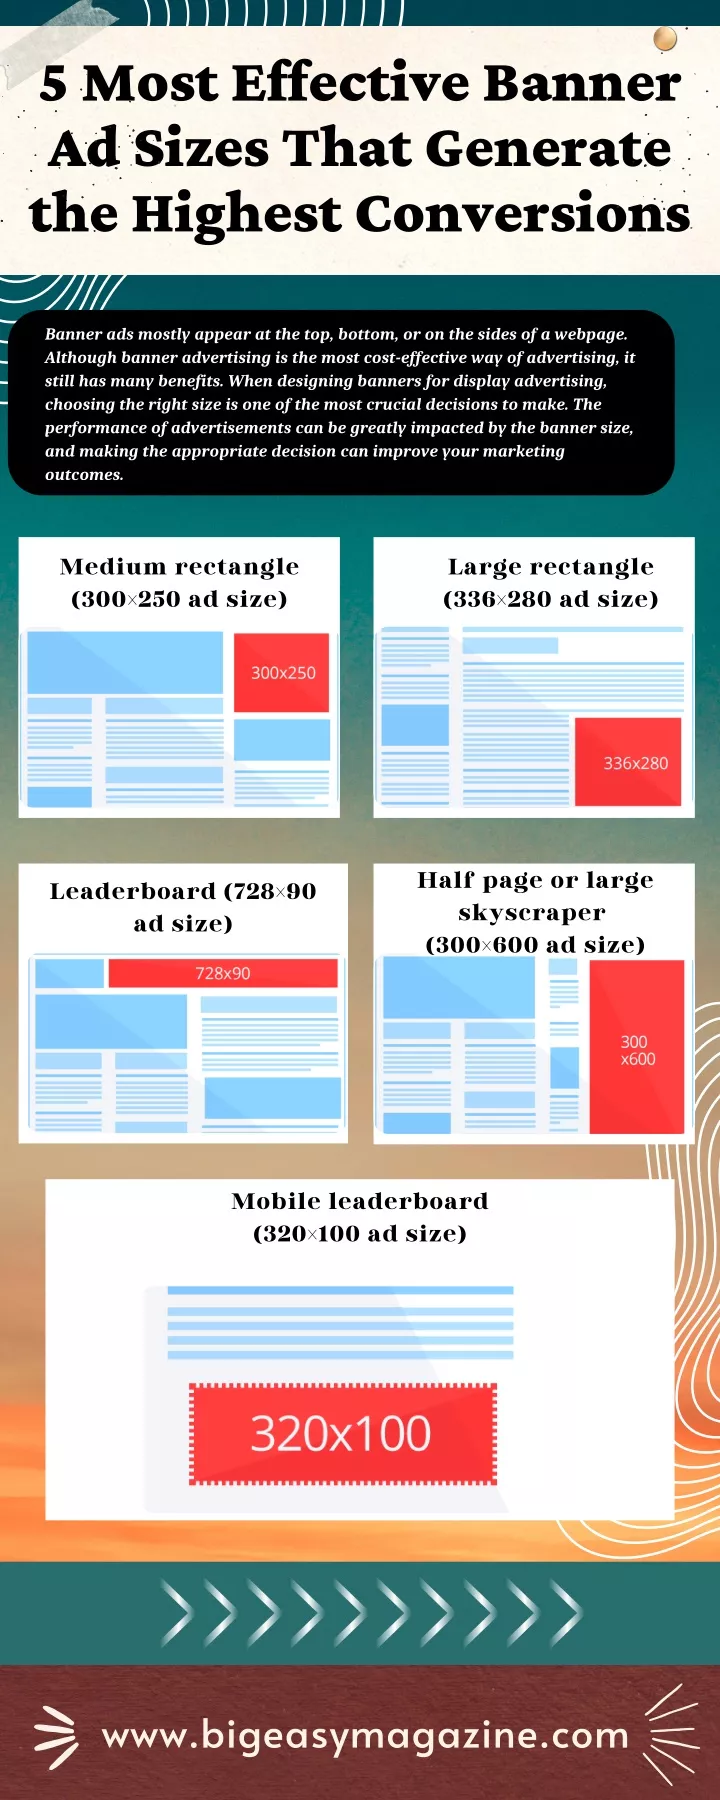 5 most effective banner ad sizes that generate